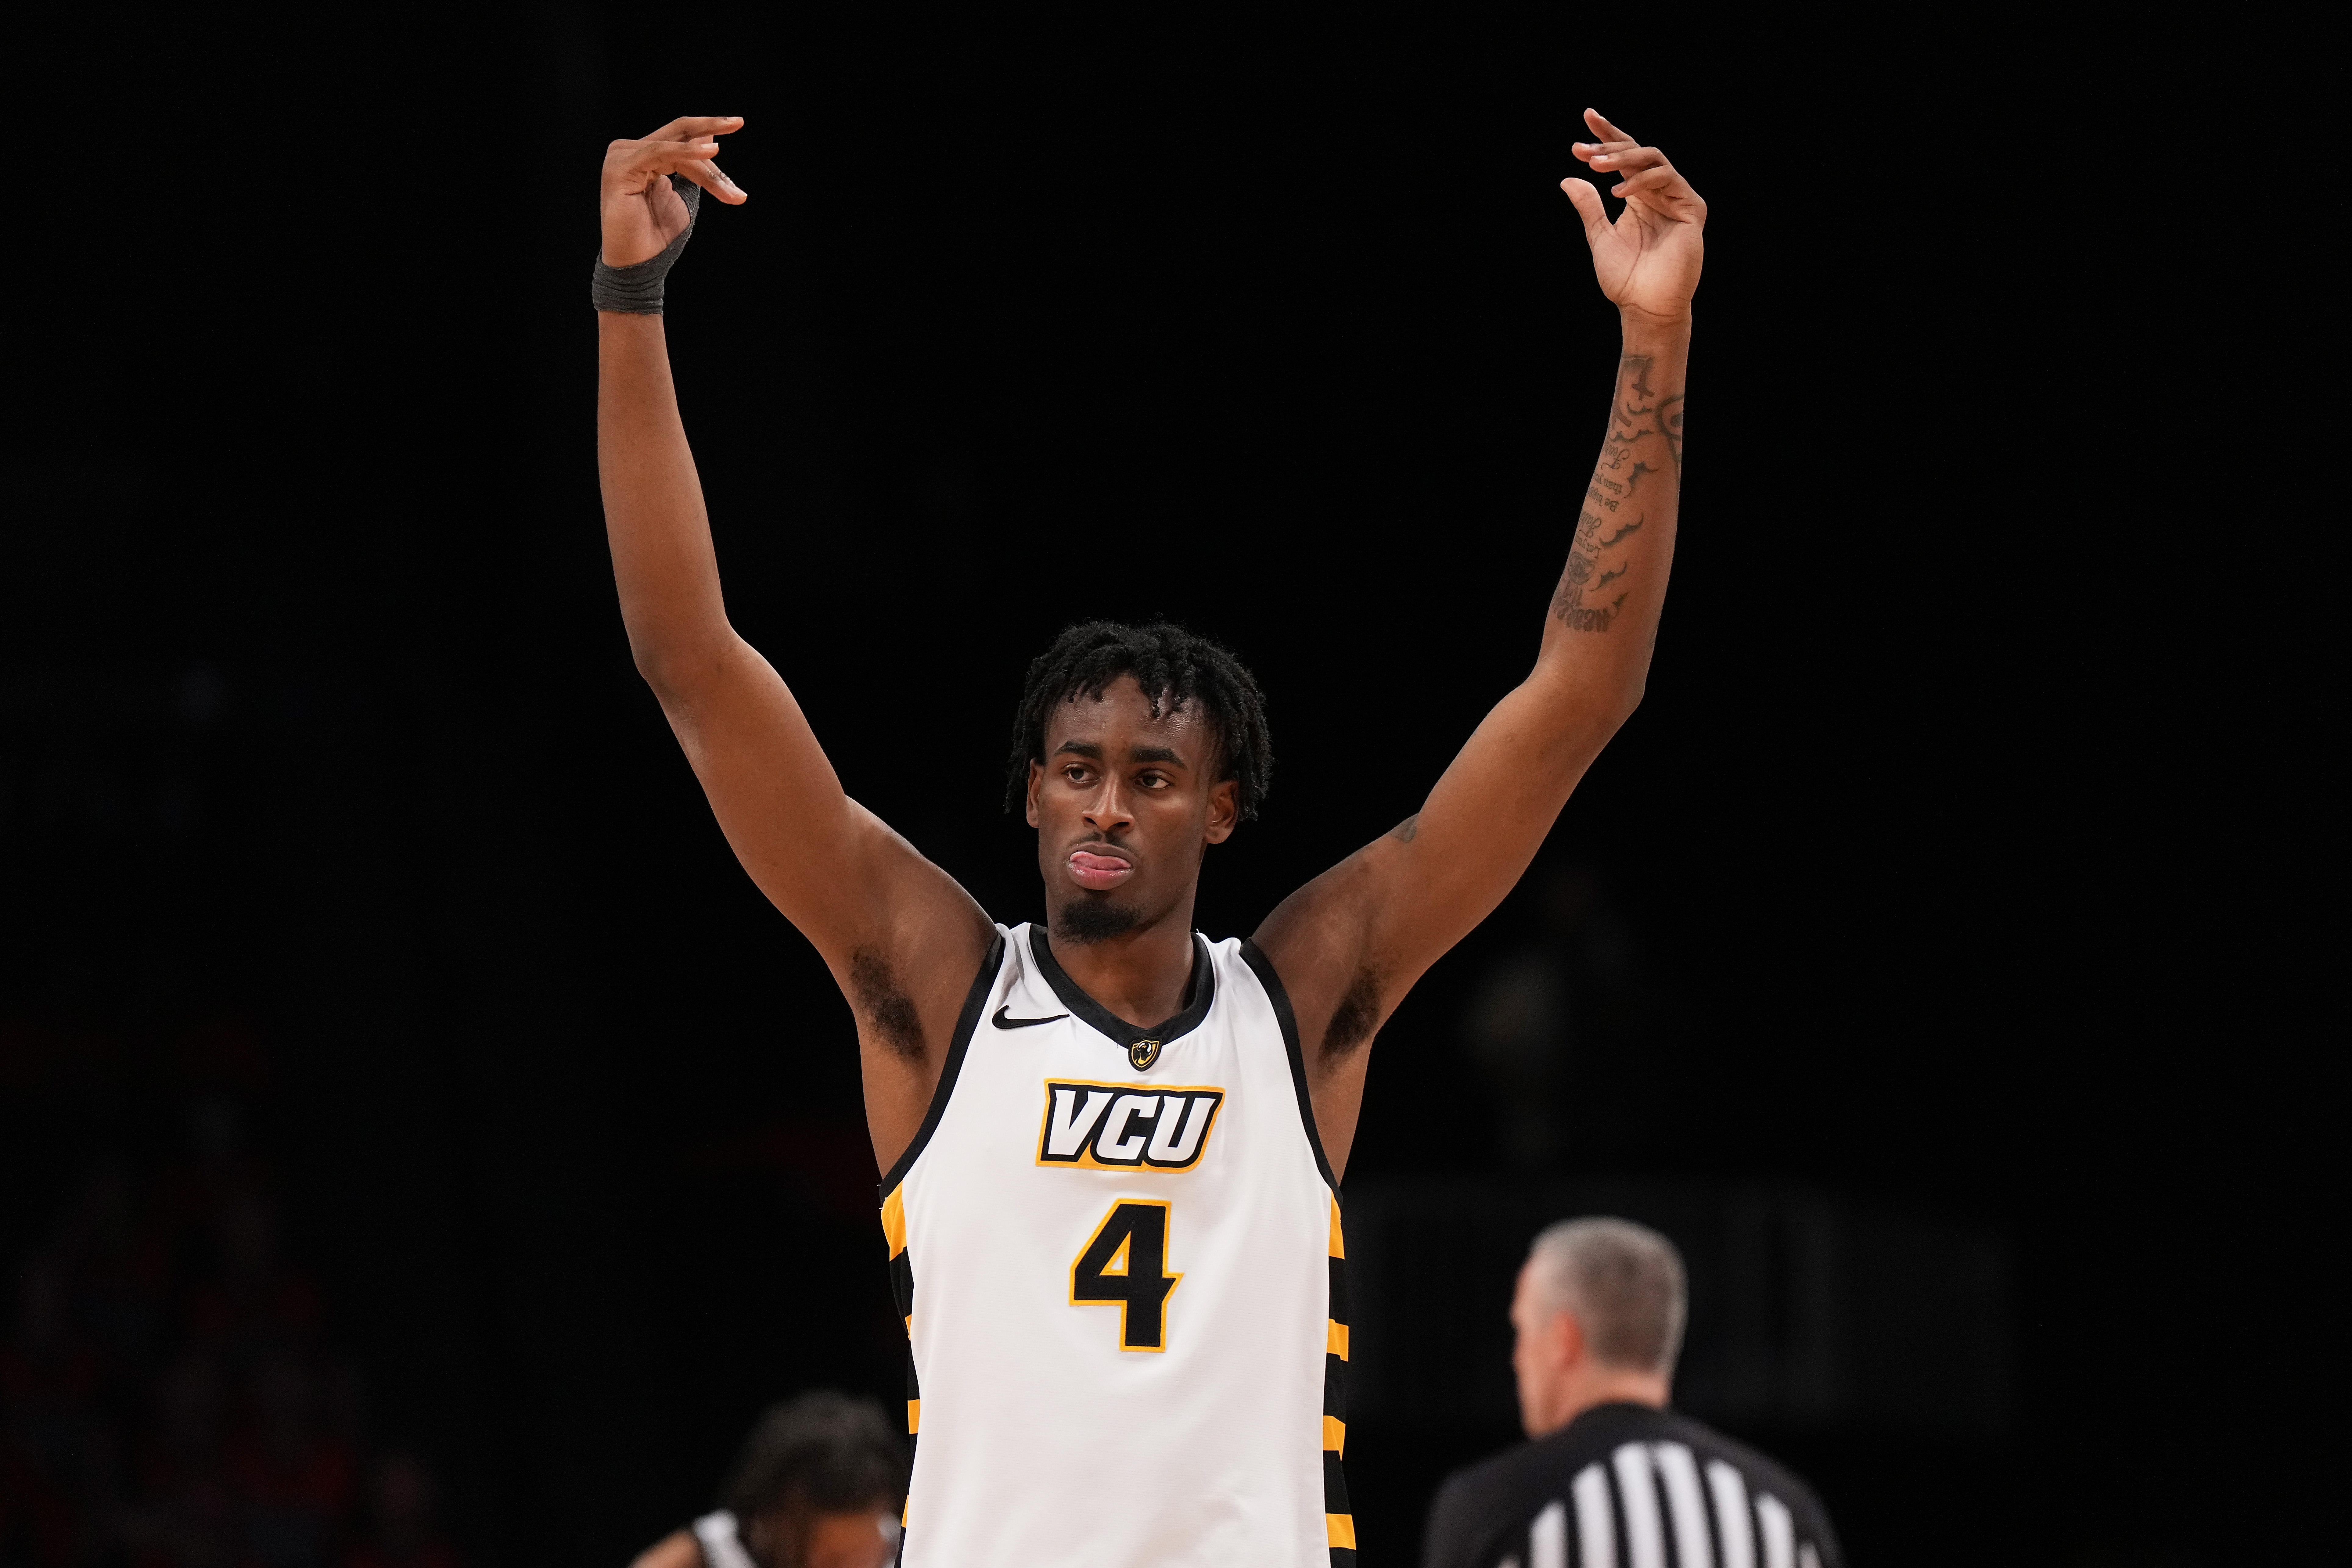 VCU transfer says Penn State ‘is definitely one of my top choices’